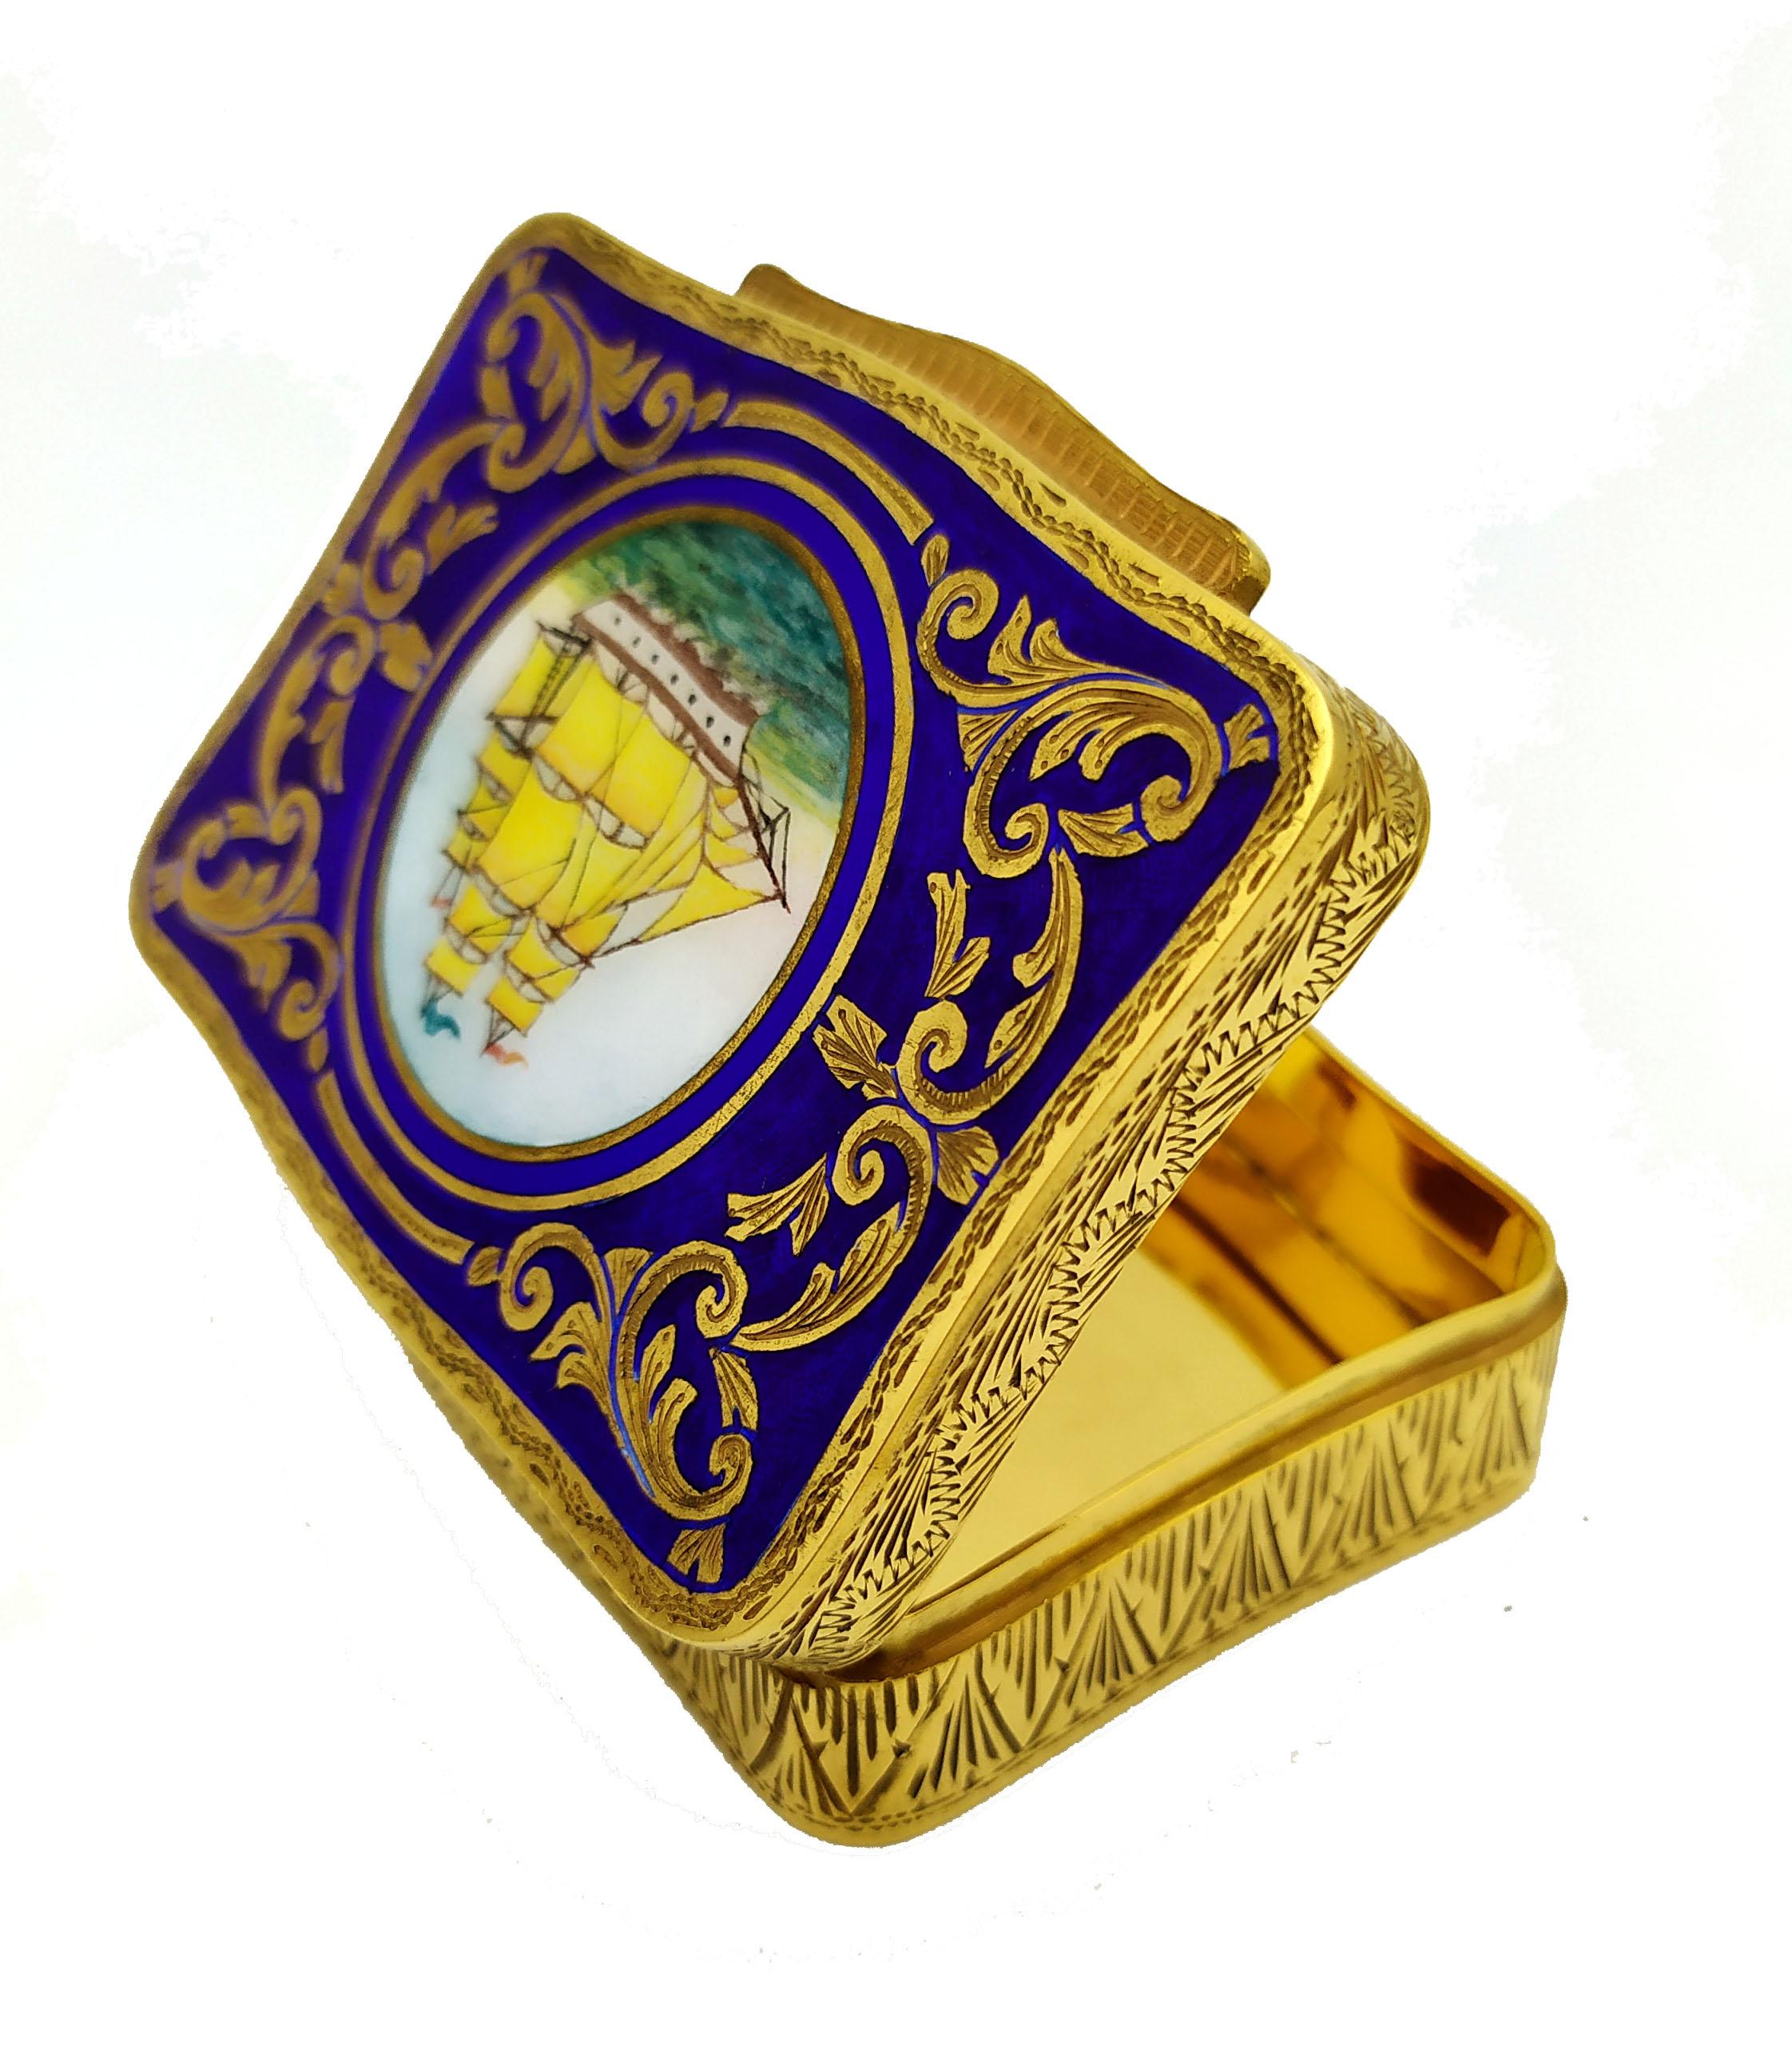 Late 20th Century Snuffbox Vessel Miniature Hand-Painted Sterling Silver Enamel Salimbeni For Sale